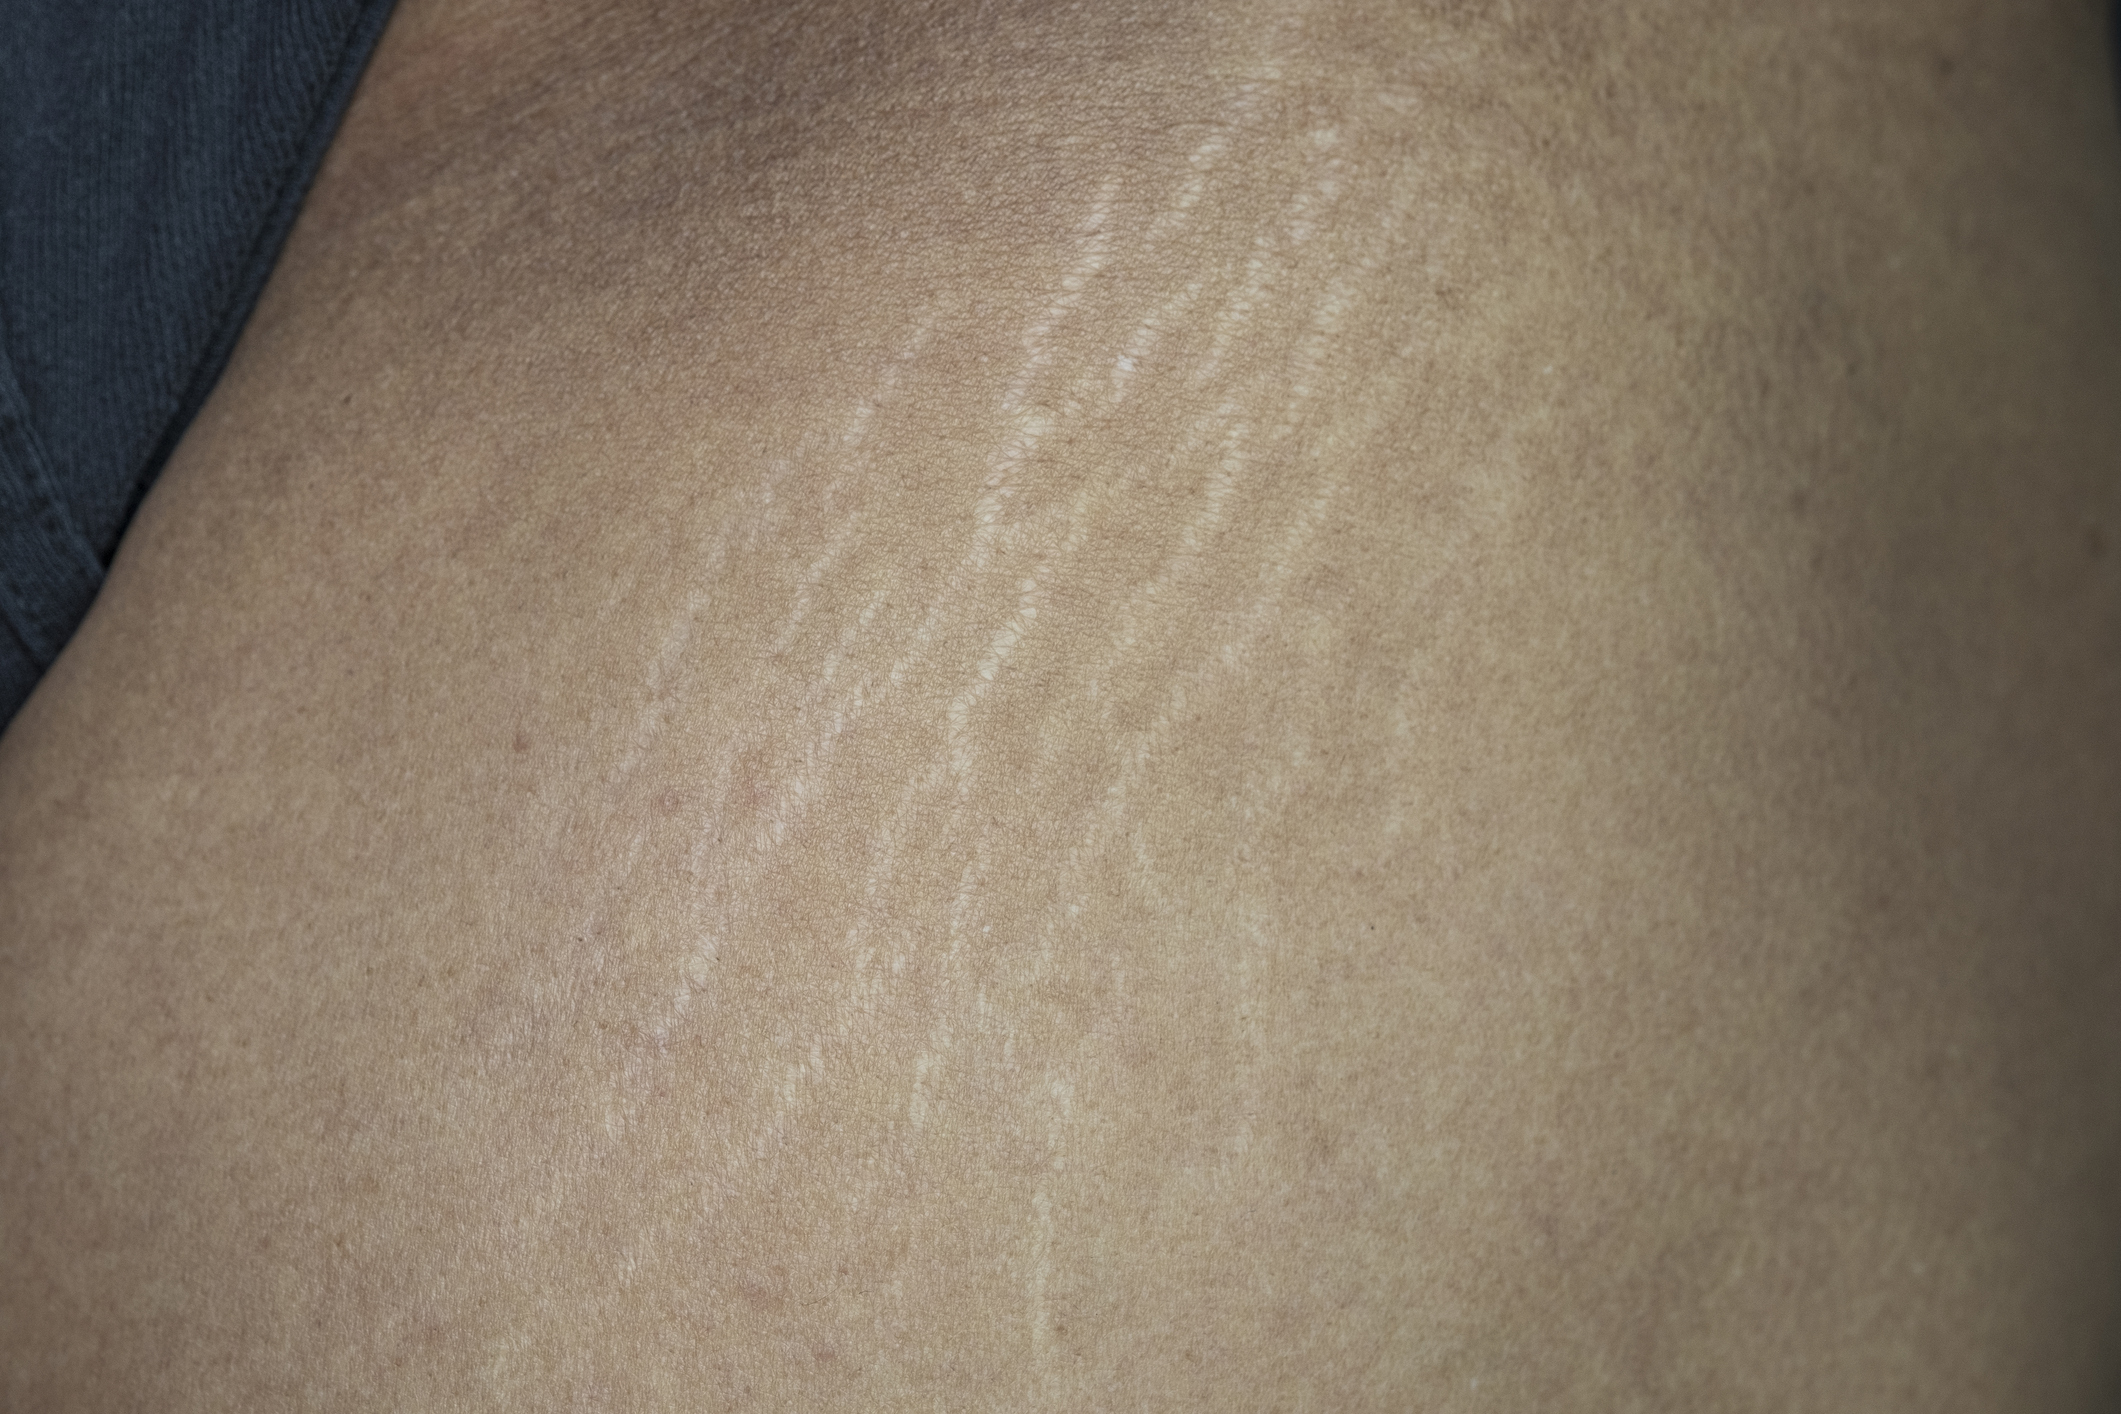 Close-up of skin with stretch marks